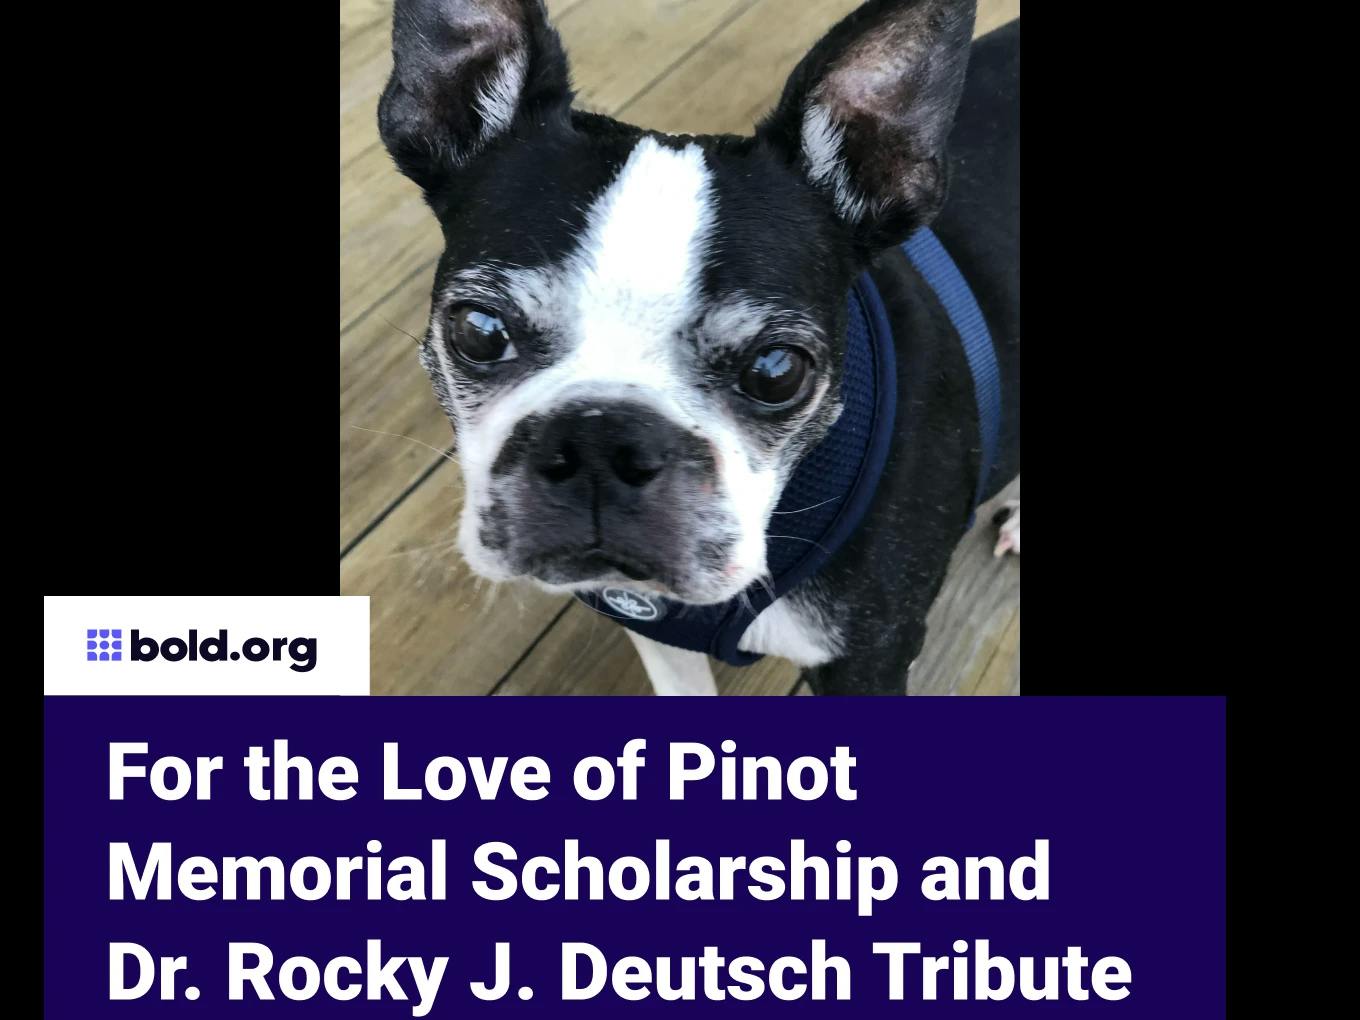 For the Love of Pinot Memorial Scholarship and Dr. Rocky J. Deutsch Tribute